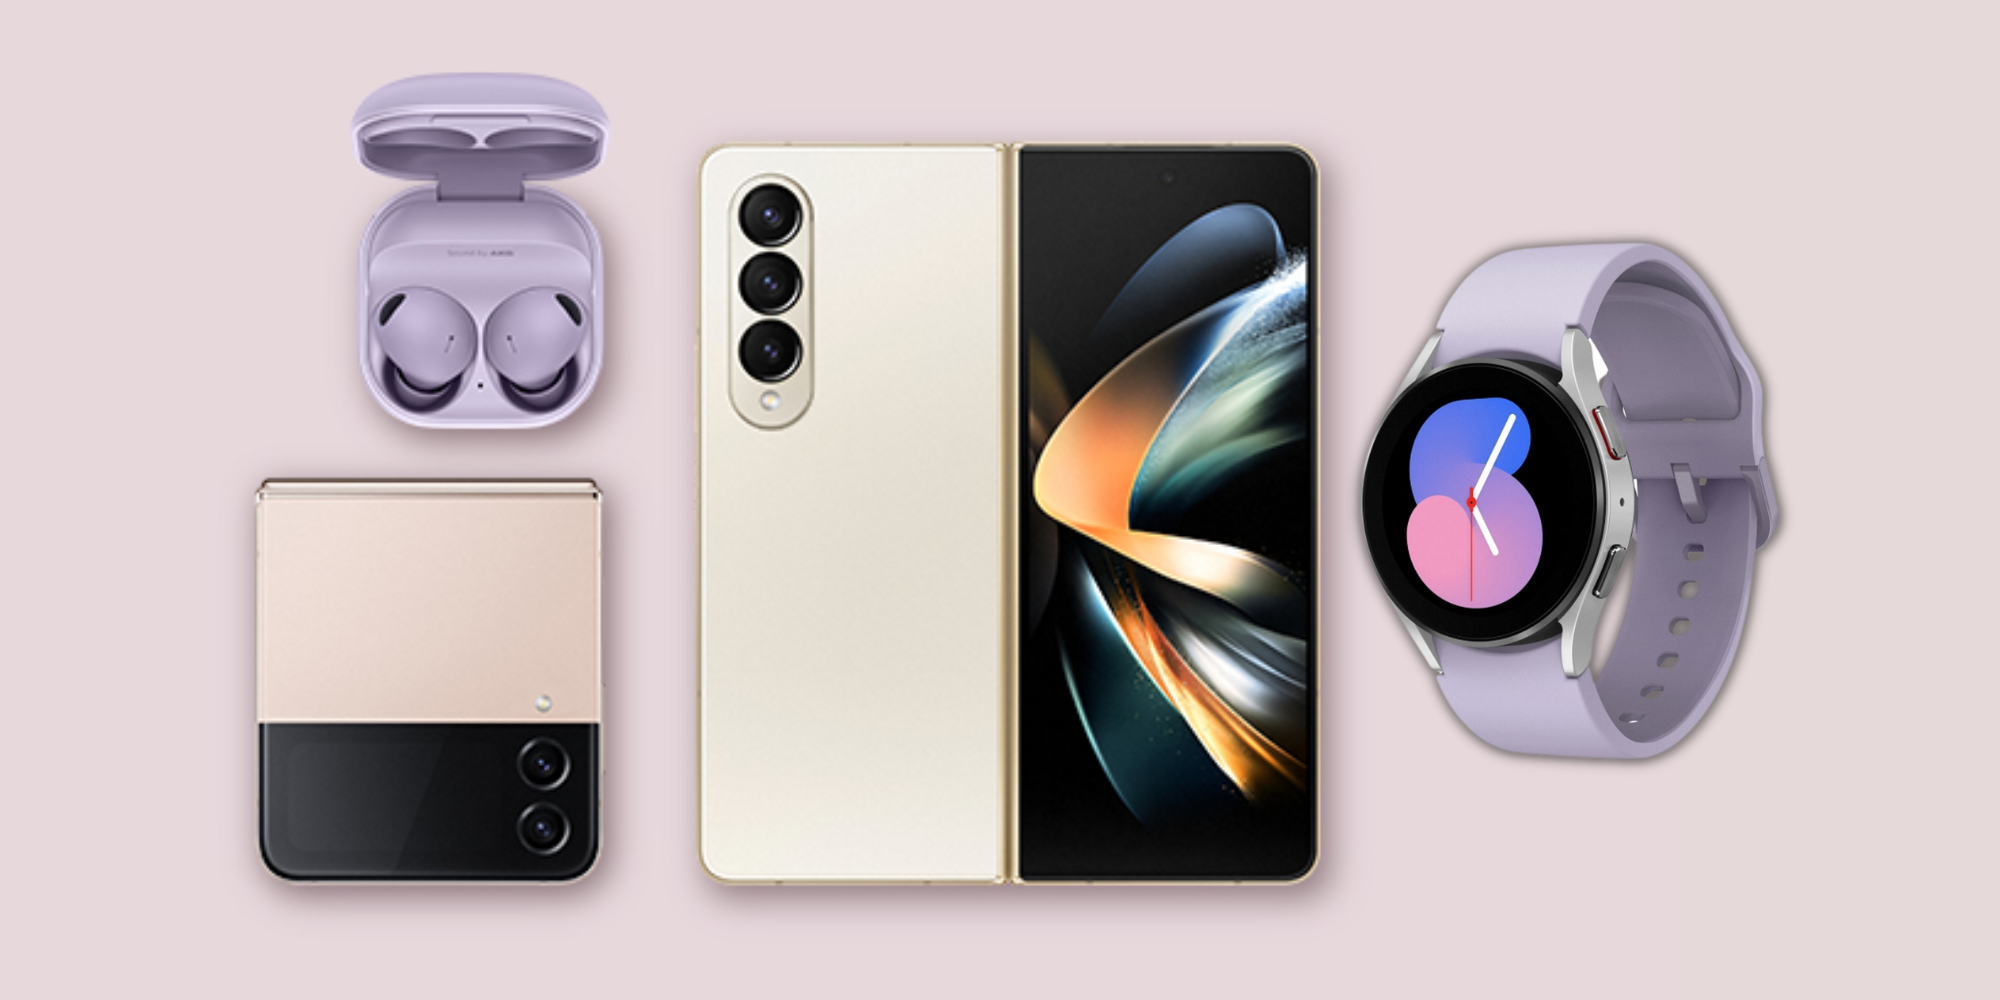 Samsung Galaxy Unpacked 2022: All The Products Announced